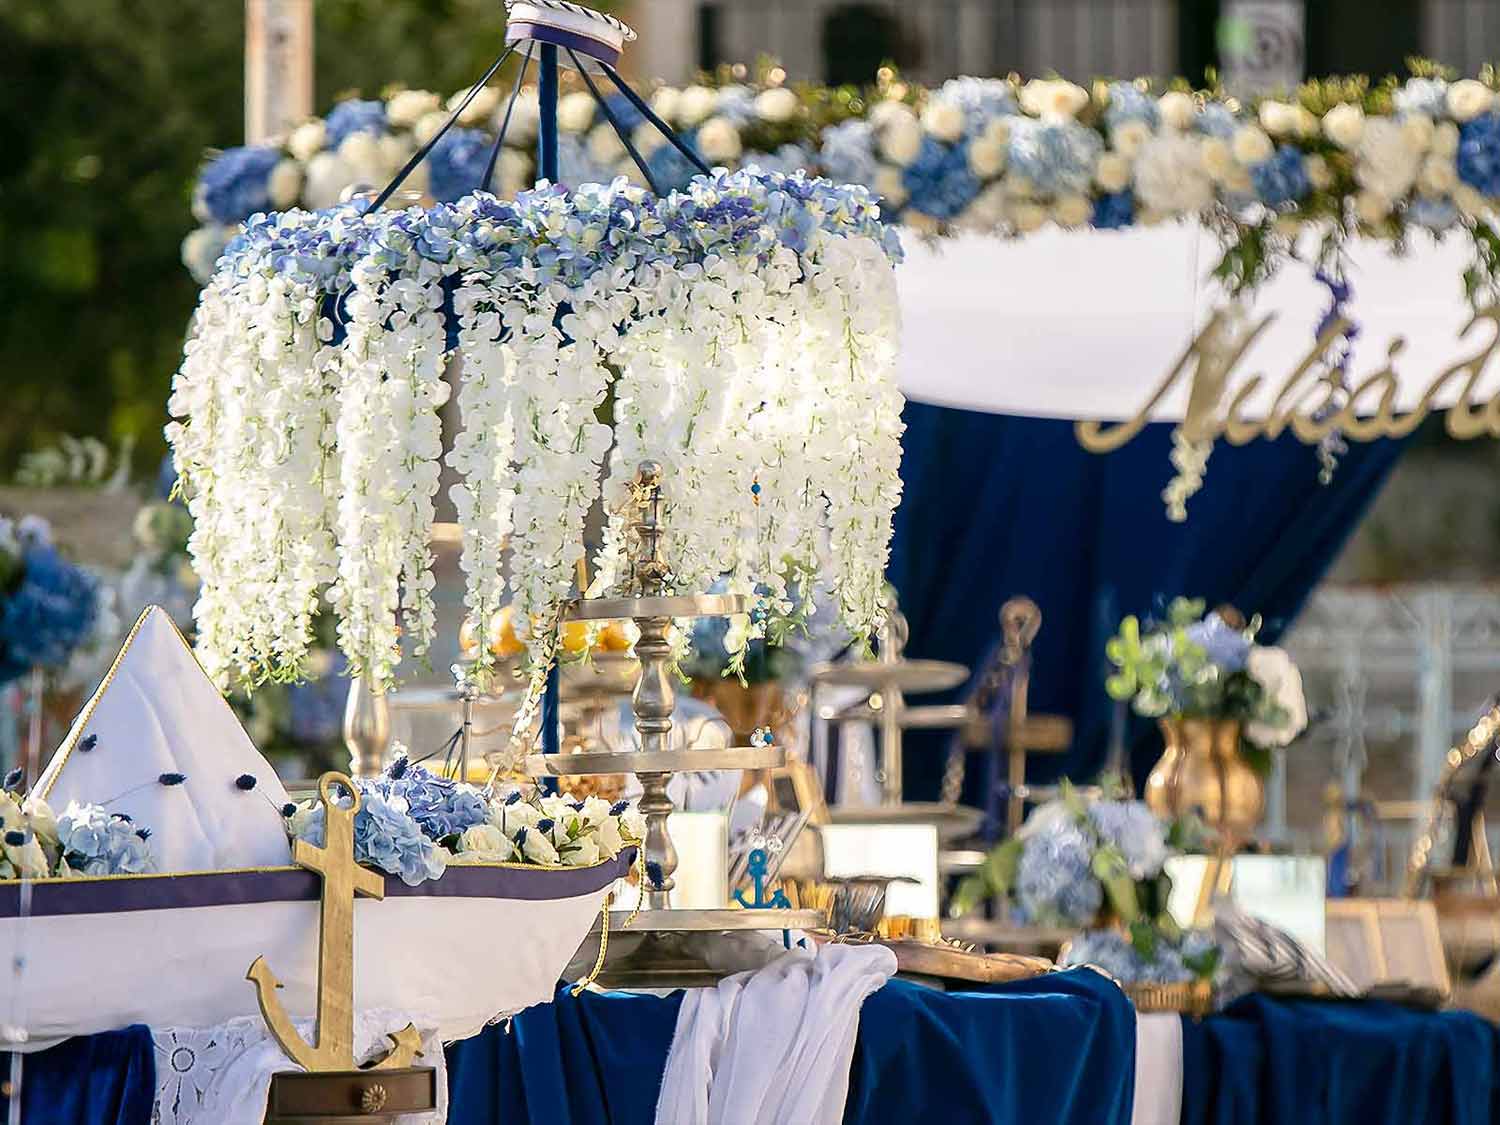 A magestic carousel full of natural flowers adding a touch of luxury in a white and blue navy themed baptism